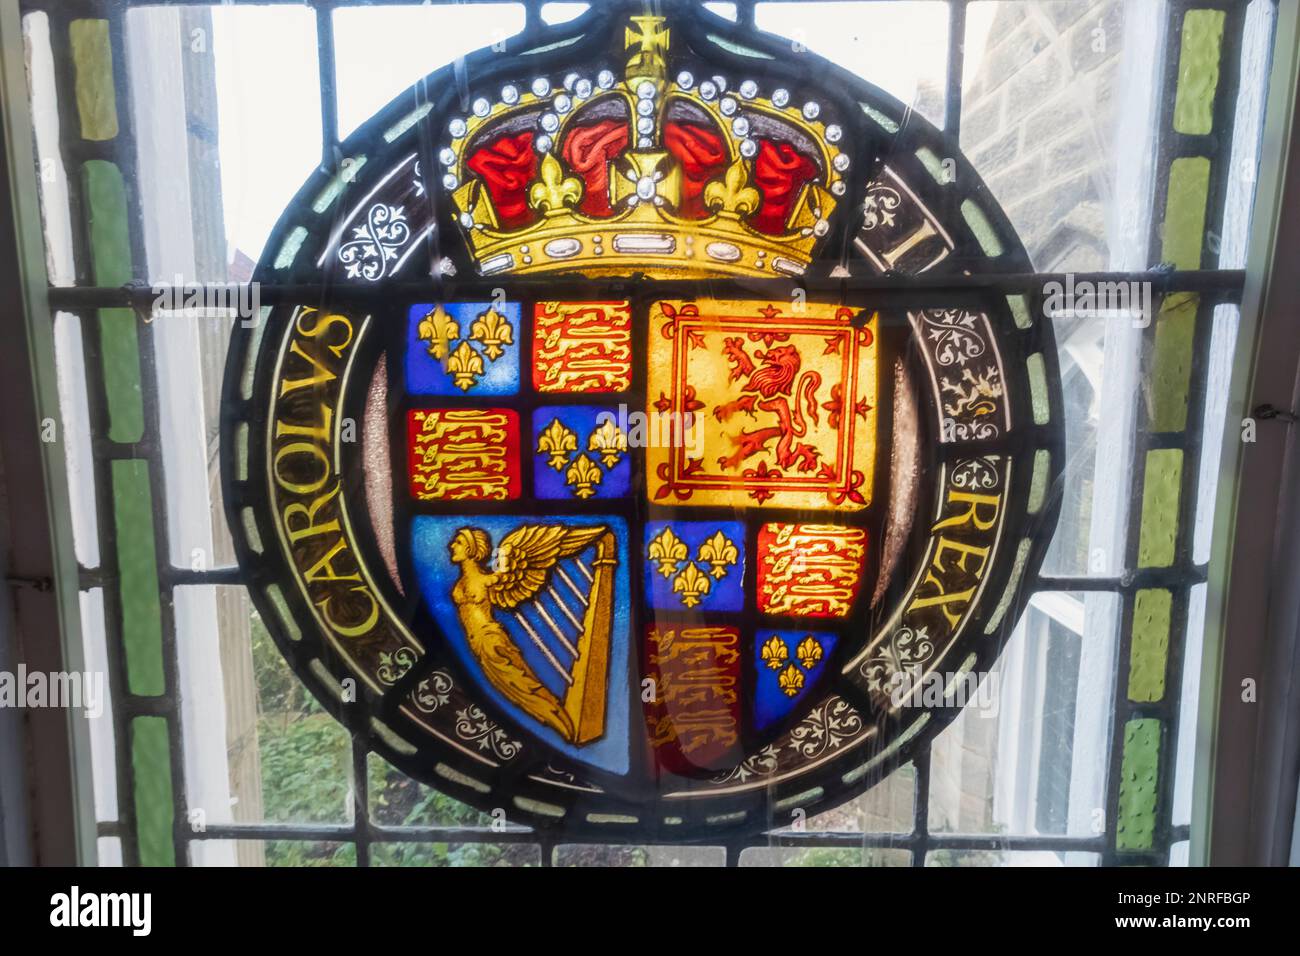 England, Kent, Edenbridge, Chiddingstone, Chiddingstone Castle, Stained Glass Window depicting The Coat of Arms of King Charles I Stock Photo